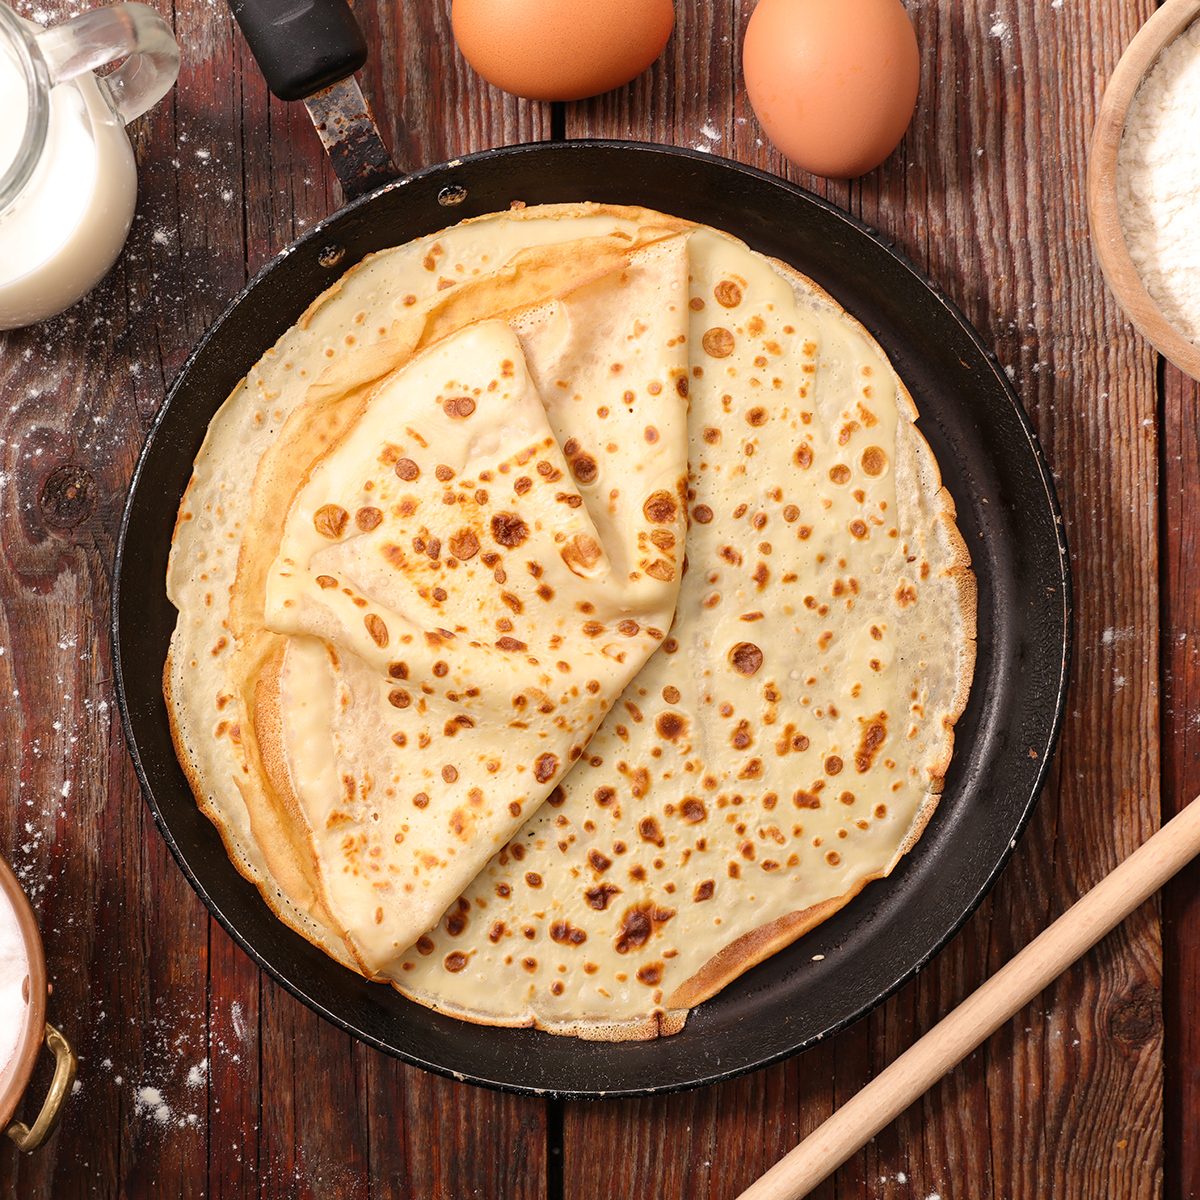 https://www.tasteofhome.com/wp-content/uploads/2020/02/crepe-with-ingredient-GettyImages-639369774.jpg?fit=700%2C700